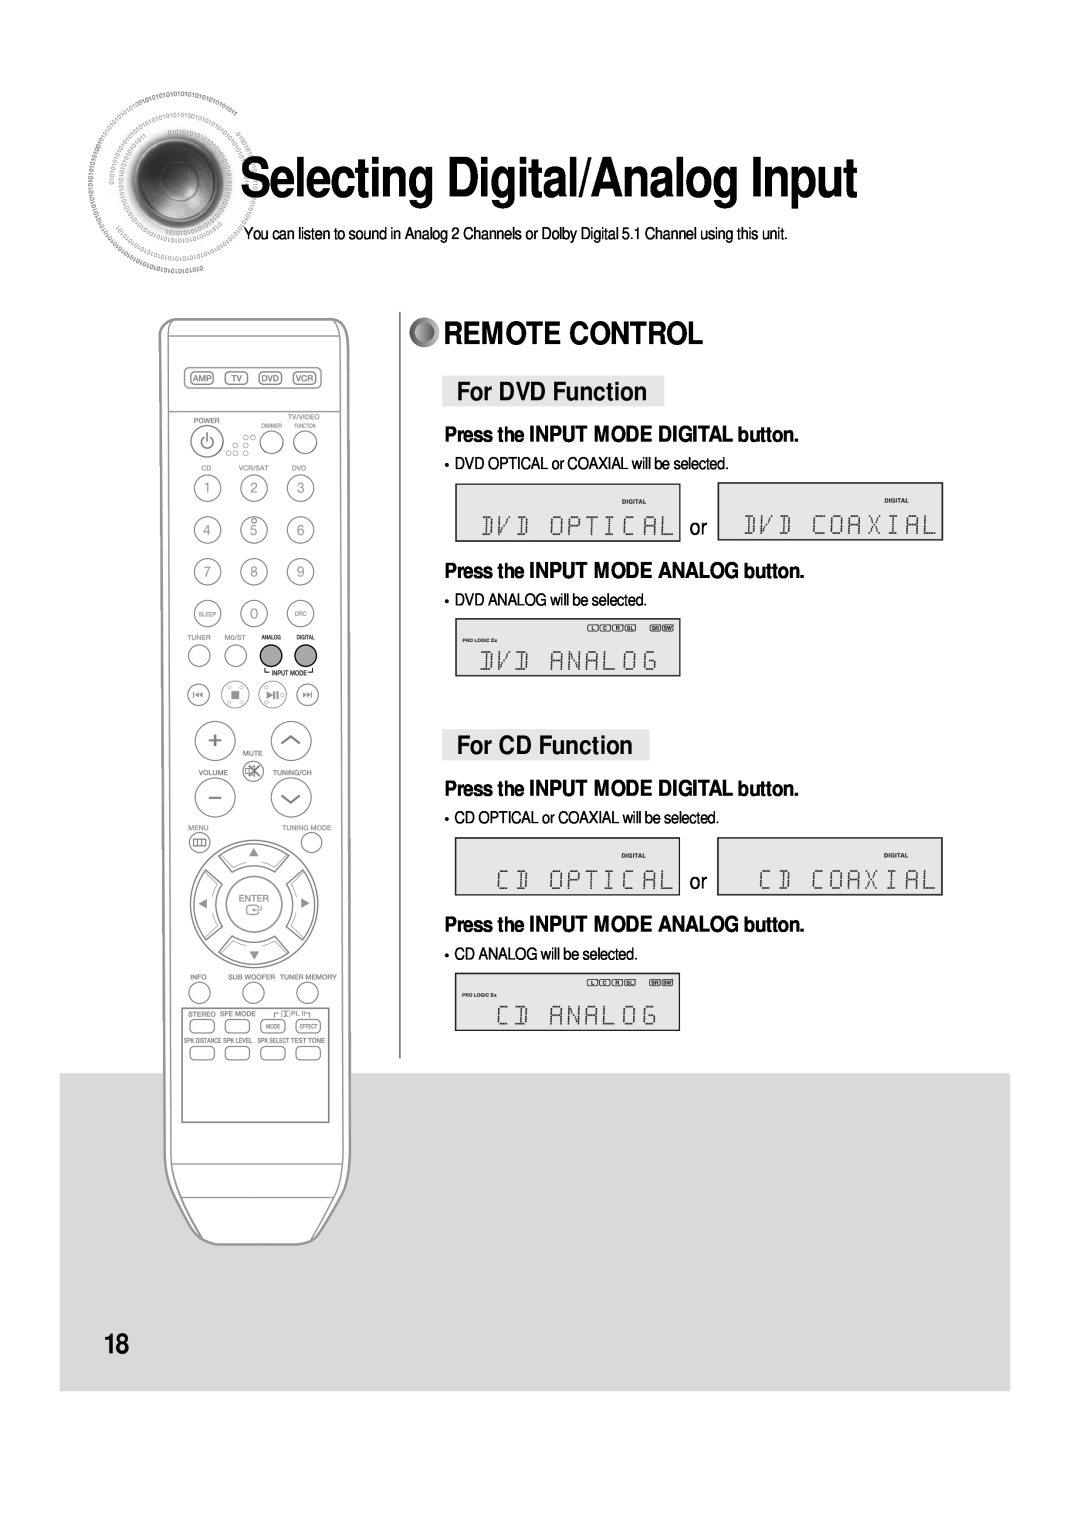 Samsung AH68-01853S, 20060510083254531 SelectingDigital/Analog Input, For DVD Function, For CD Function, Remote Control 